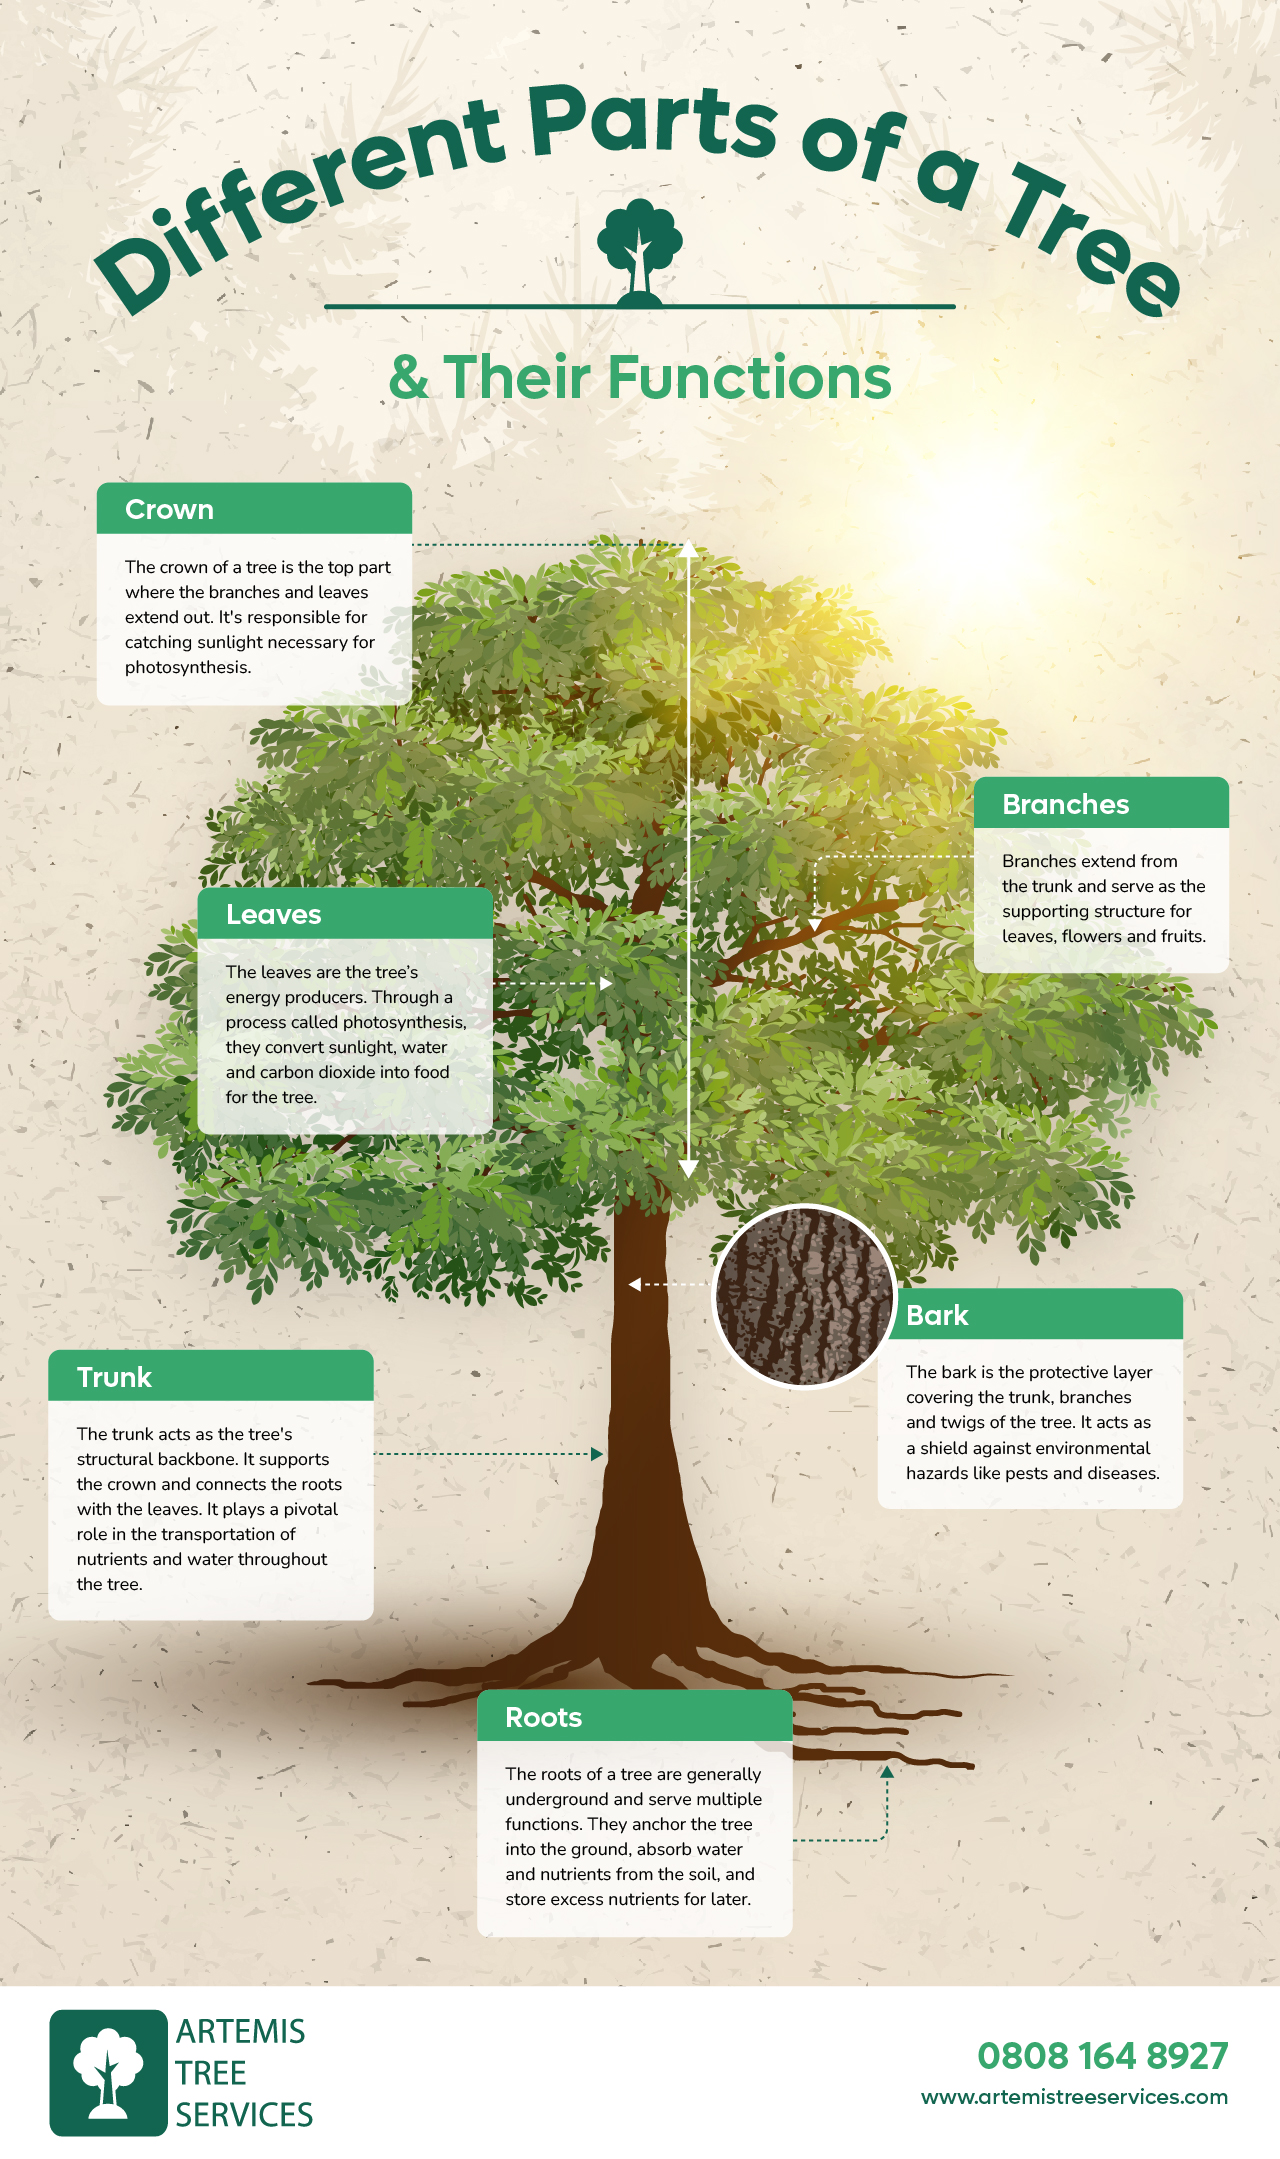 Different Parts of a Tree & Their Functions | Artemis Tree Services